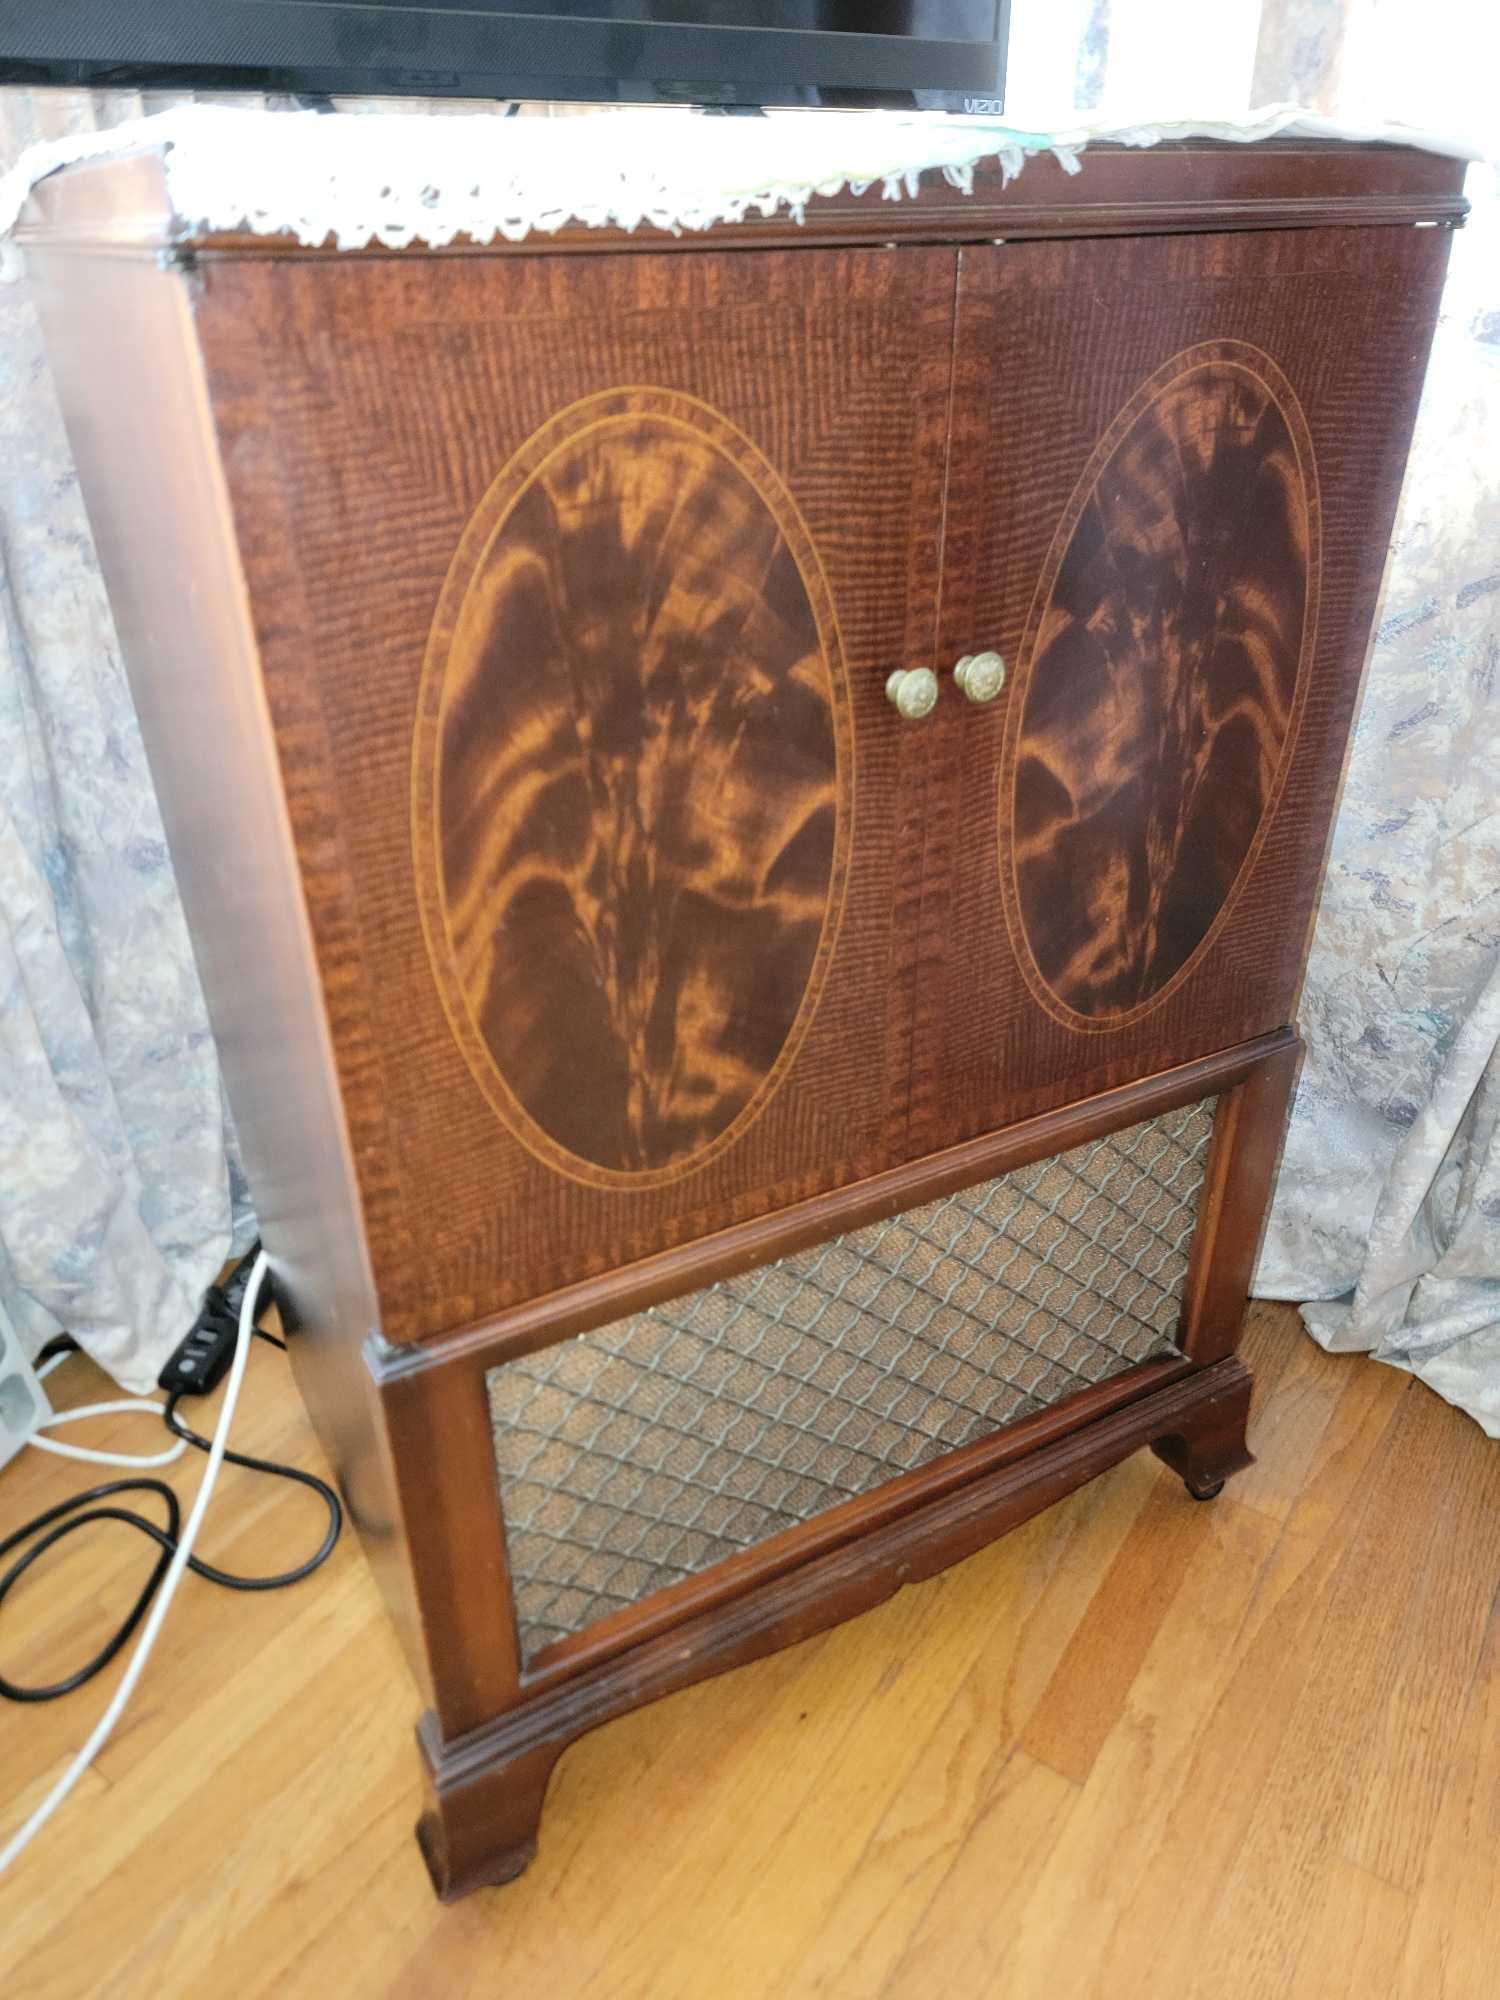 1950s Golden Throat Tone RCA Victor Television Vintage